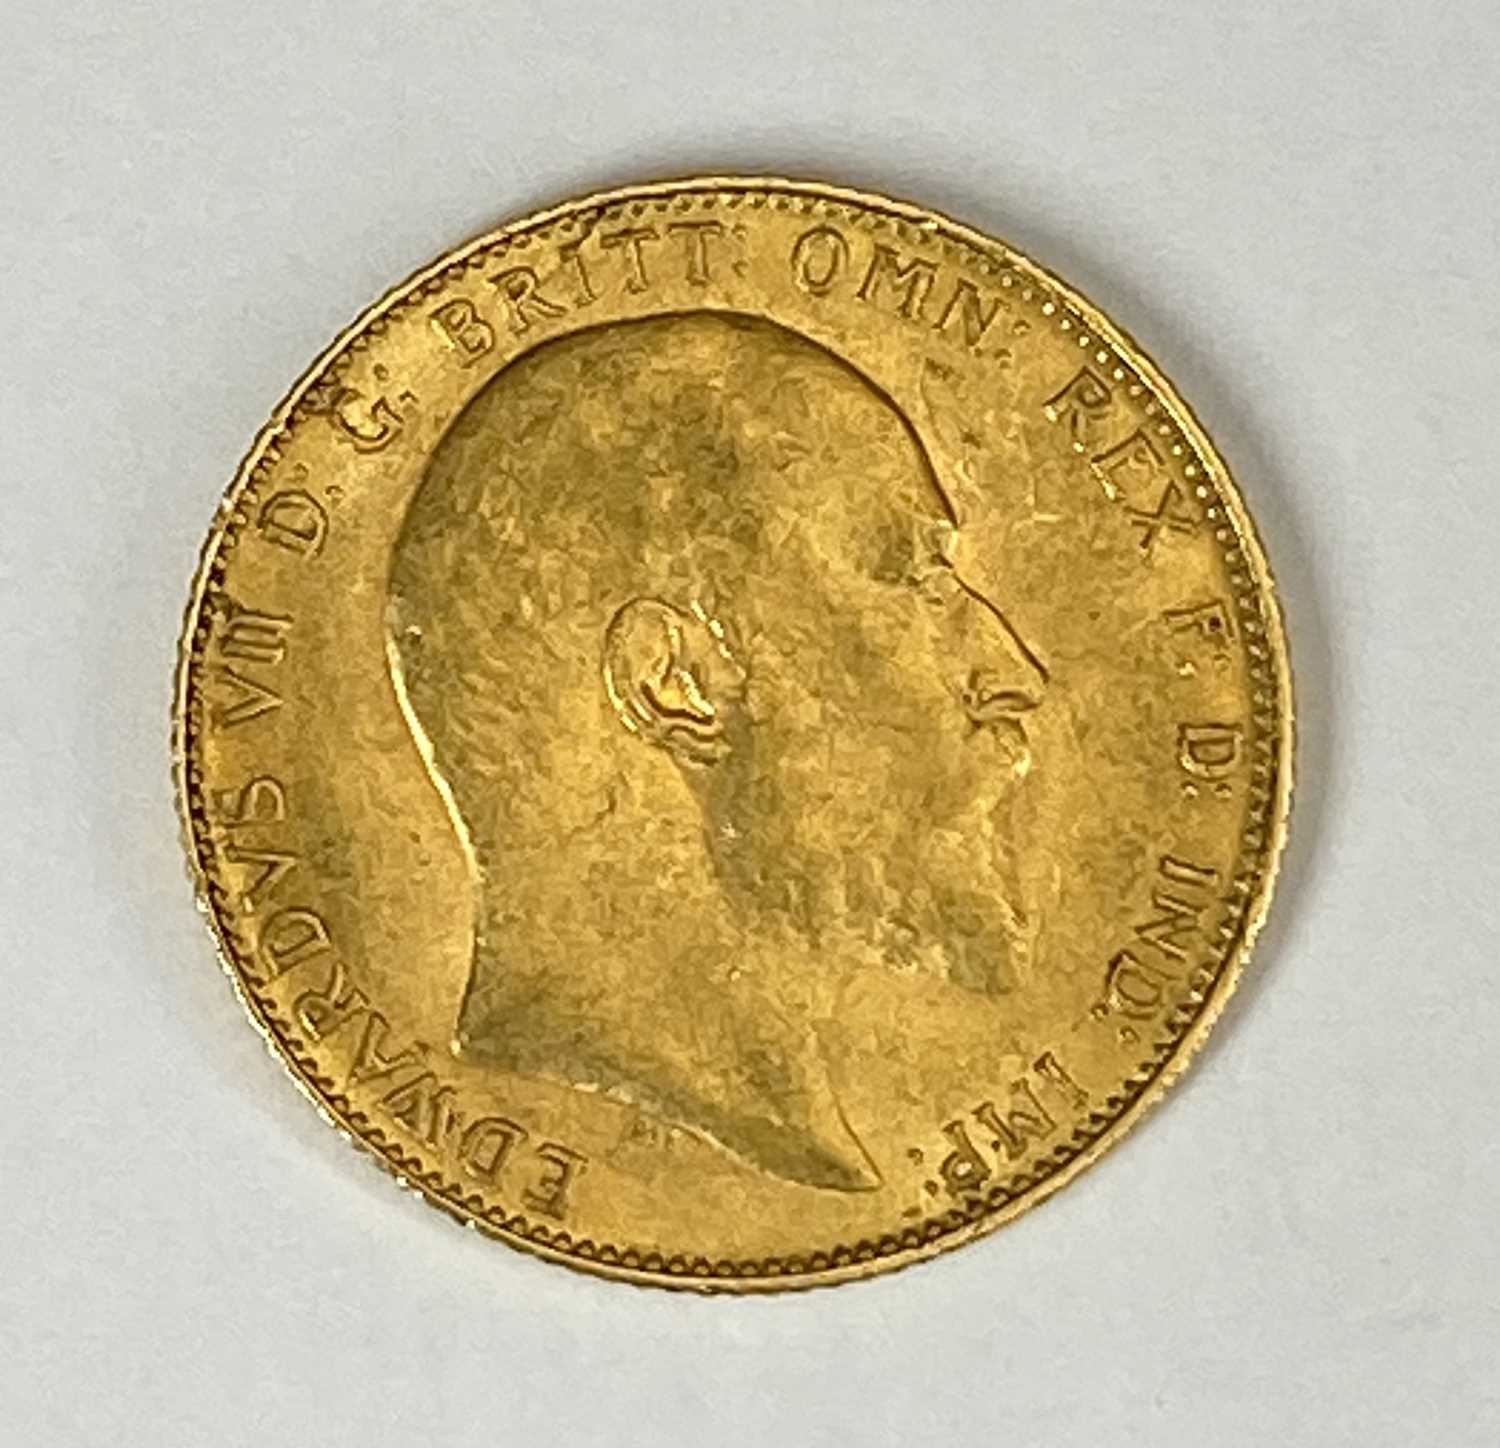 EDWARD VII GOLD FULL SOVEREIGN, 1908, 8g Provenance: private collection Gwynedd - Image 2 of 2